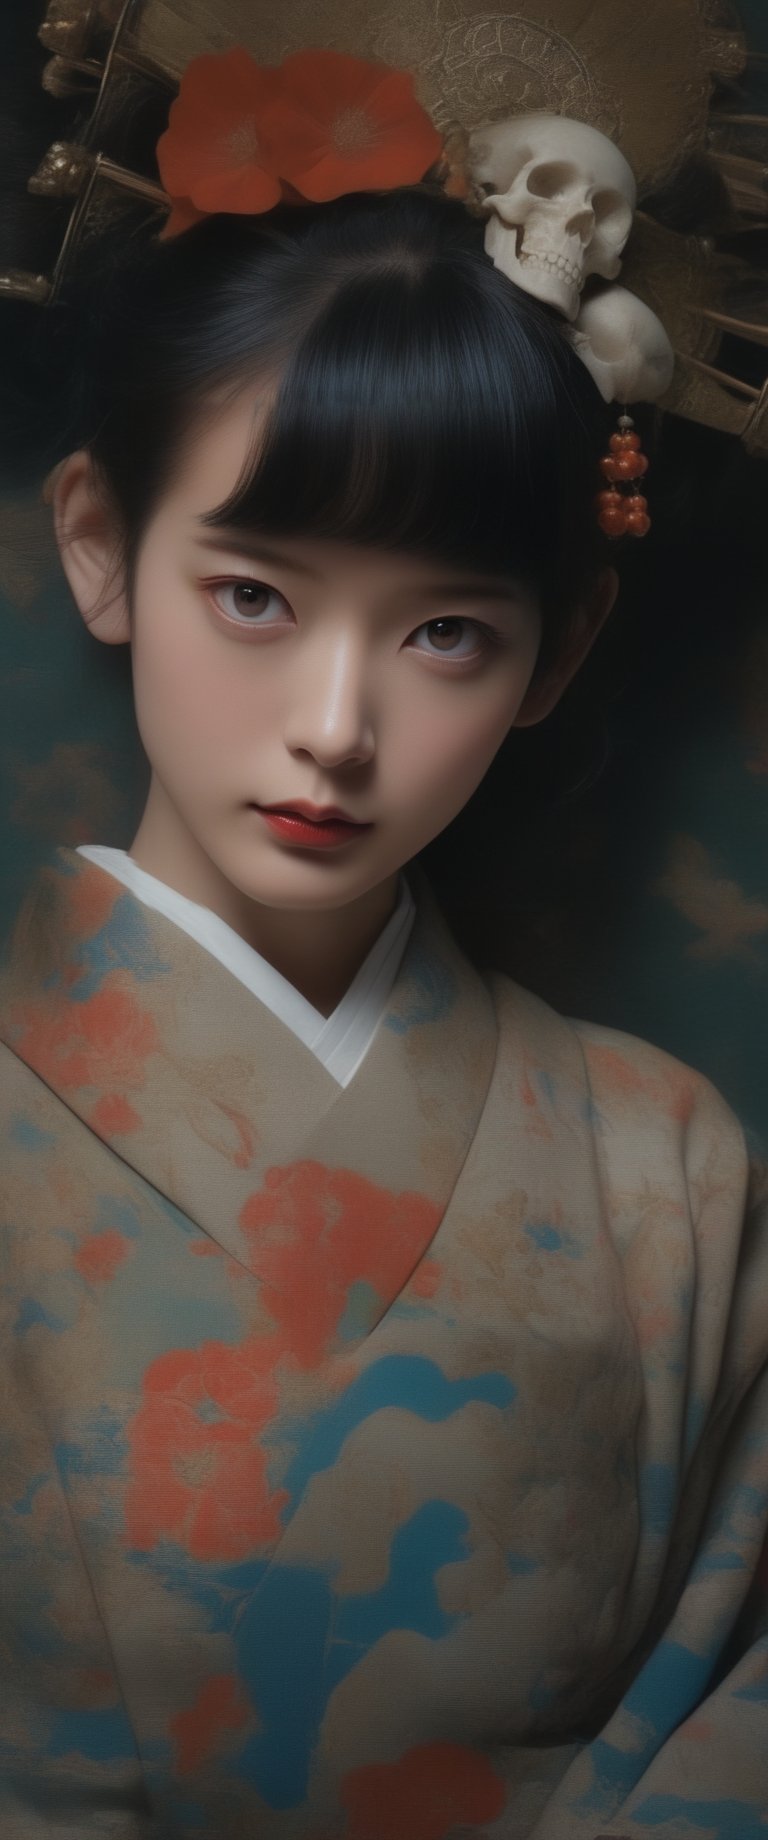 breathtaking  RAW photo of female ((1girl, japanesse concubine, japanesse geisha,bangs, darr hair, shogun,,looking at viewer,masterpiece, high quality, best quality, highres

 )), dark and moody style, perfect face, outstretched perfect hands . masterpiece, professional, award-winning, intricate details, ultra high detailed, 64k, dramatic light, volumetric light, dynamic lighting, Epic, splash art .. ), by james jean $, roby dwi antono $, ross tran $. francis bacon $, michal mraz $, adrian ghenie $, petra cortright $, gerhard richter $, takato yamamoto $, ashley wood, tense atmospheric, , , , sooyaaa,IMGFIX,Comic Book-Style,Movie Aesthetic,action shot,photo r3al,bad quality image,oil painting, cinematic moviemaker style,Japan Vibes,H effect,koh_yunjung ,koh_yunjung,kwon-nara,sooyaaa,colorful,bones,skulls,armor,han-hyoju-xl
,DonMn1ghtm4reXL, ct-fujiii